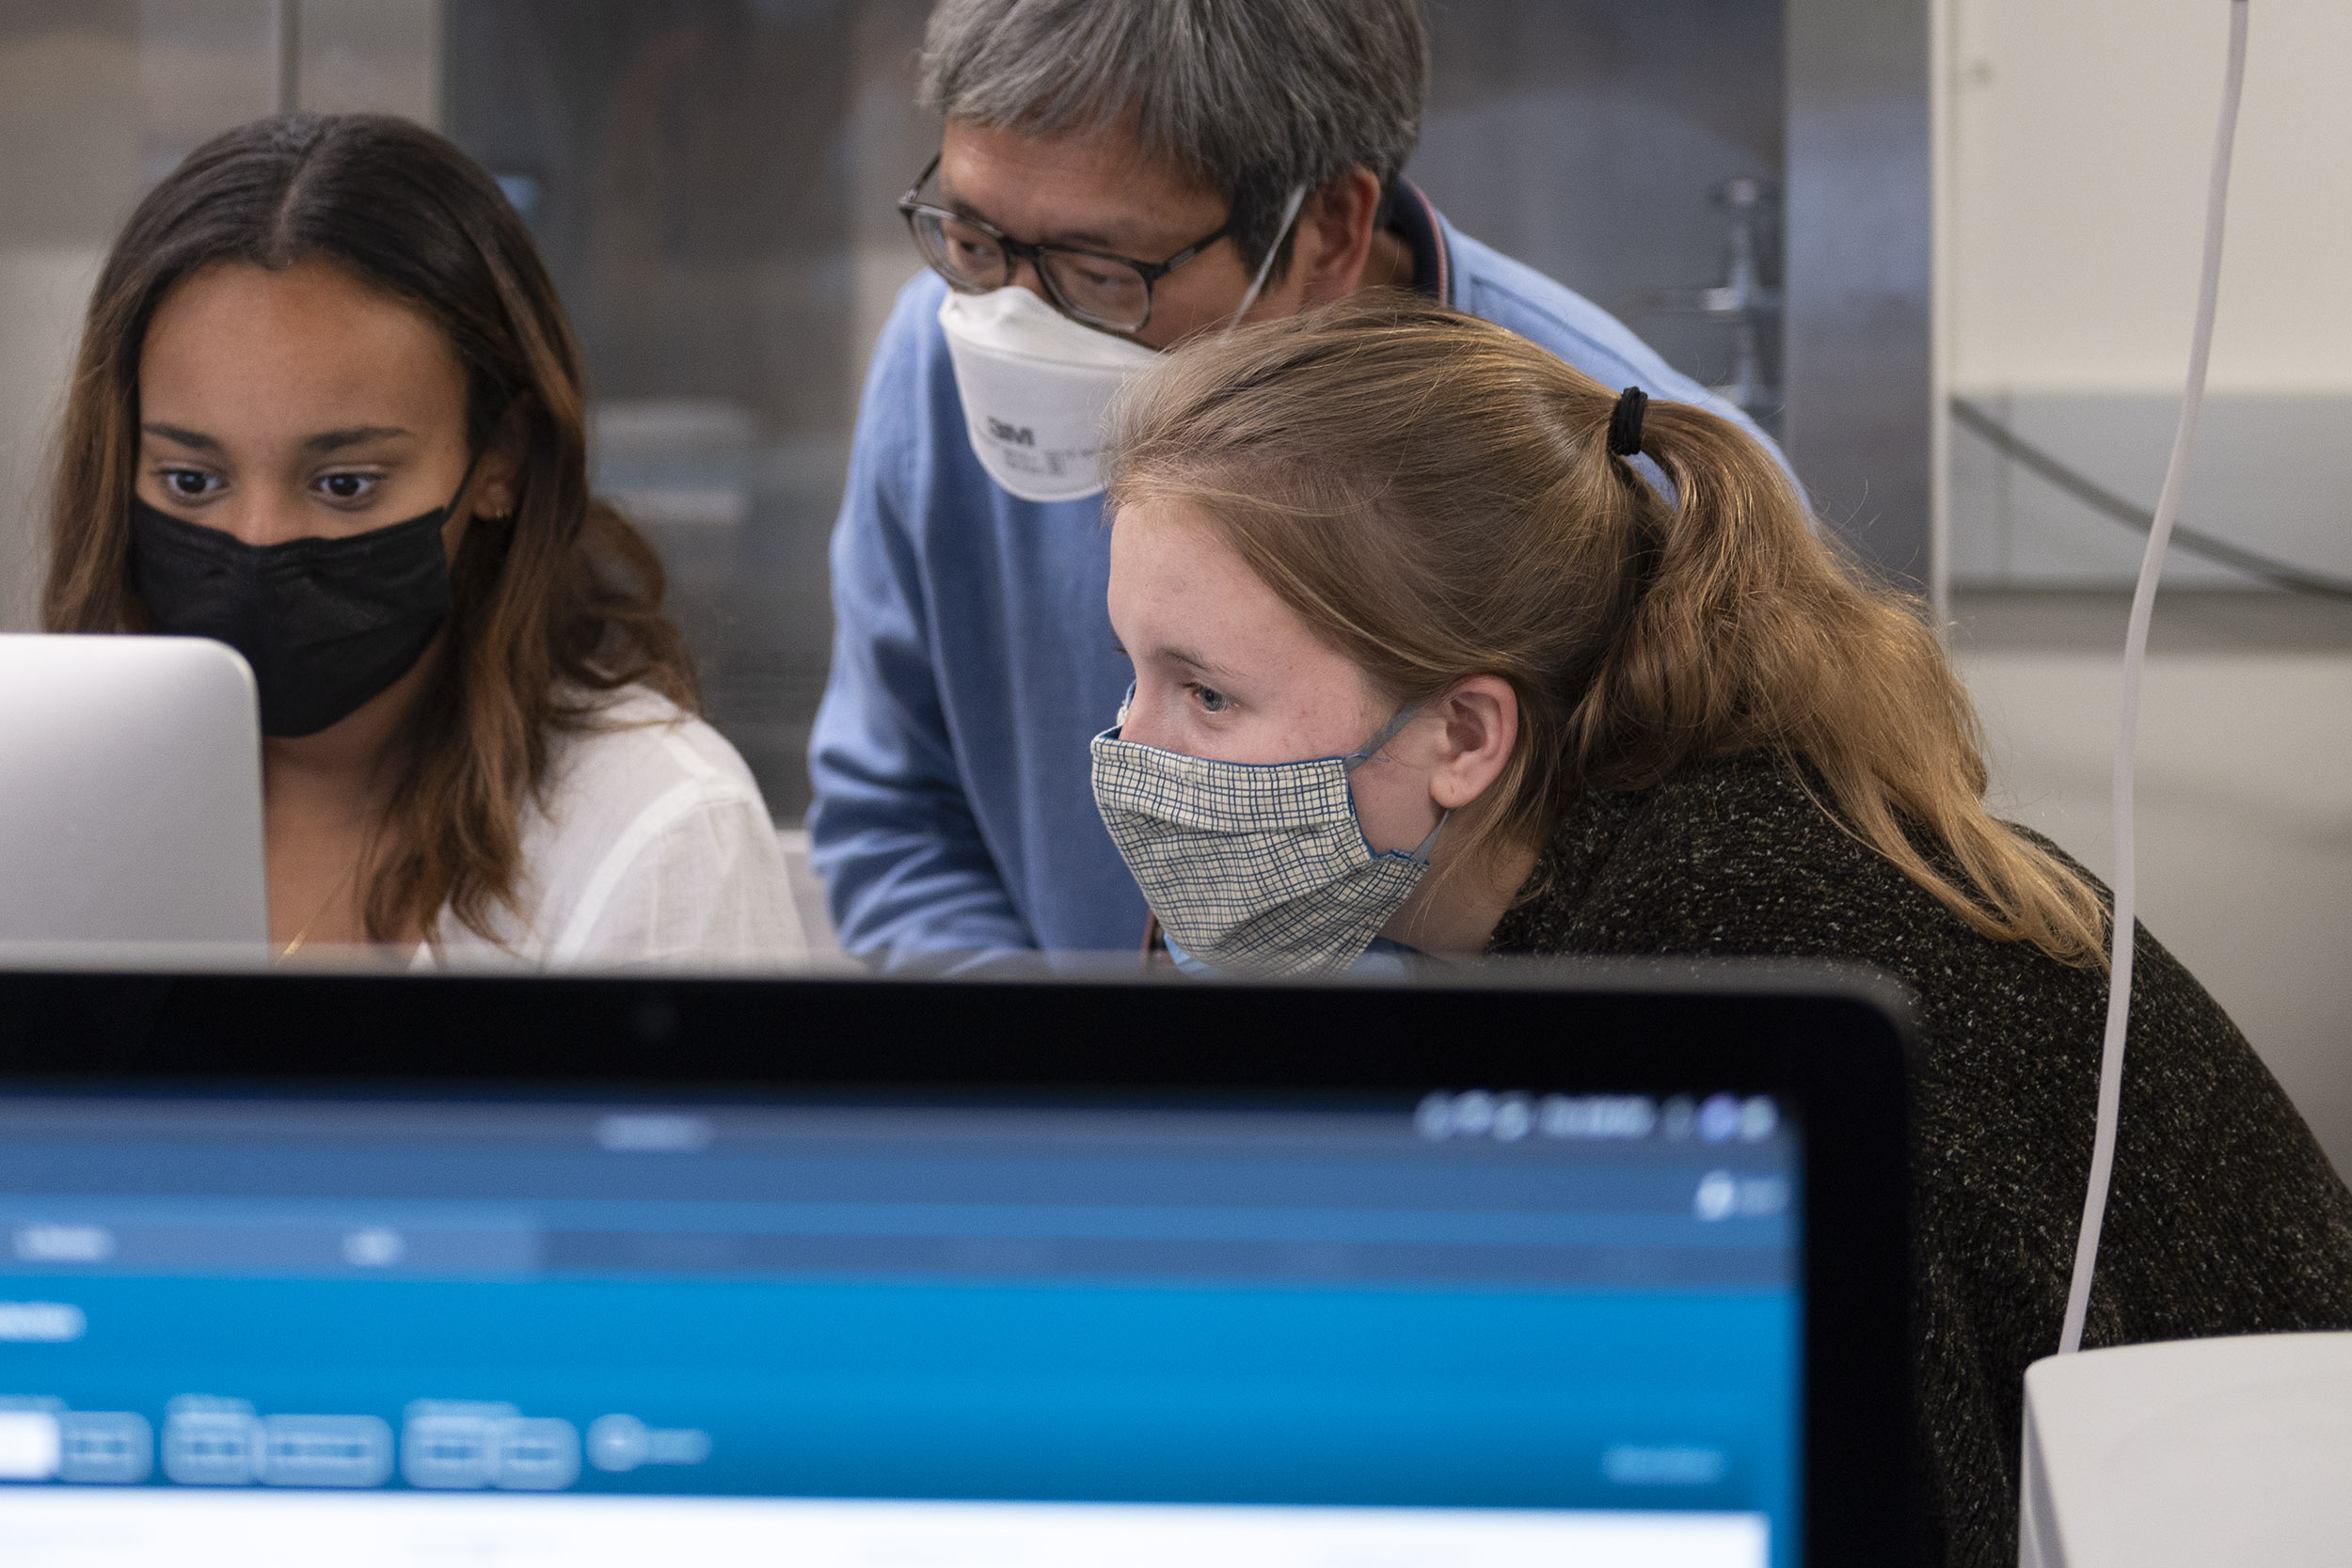 Bethlehem Judah (left) and Simonne Guenette (right) analyze real life DNA sequencing with professor Martin Wu (middle) on a computer